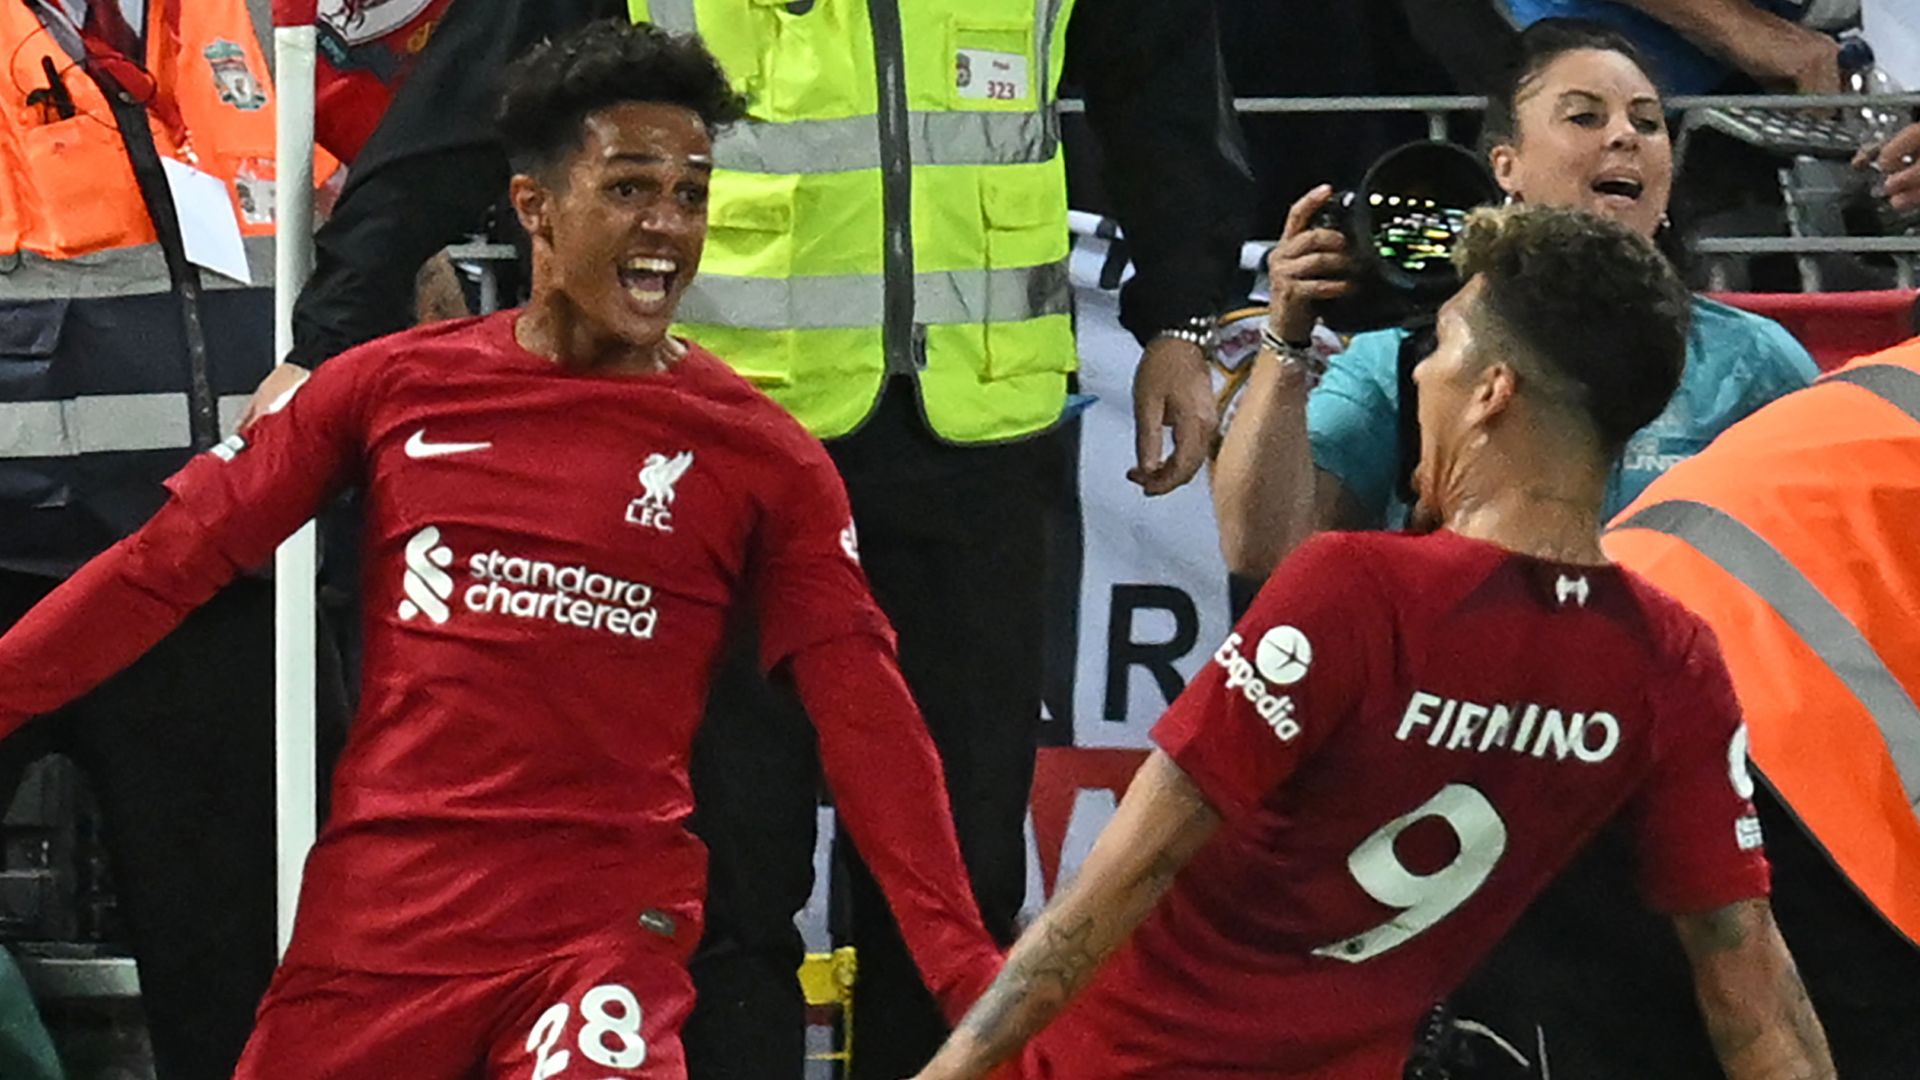 Liverpool 2-1 Newcastle: Fabio Carvalho scores 98th-minute winner as Reds come from behind to snatch dramatic win